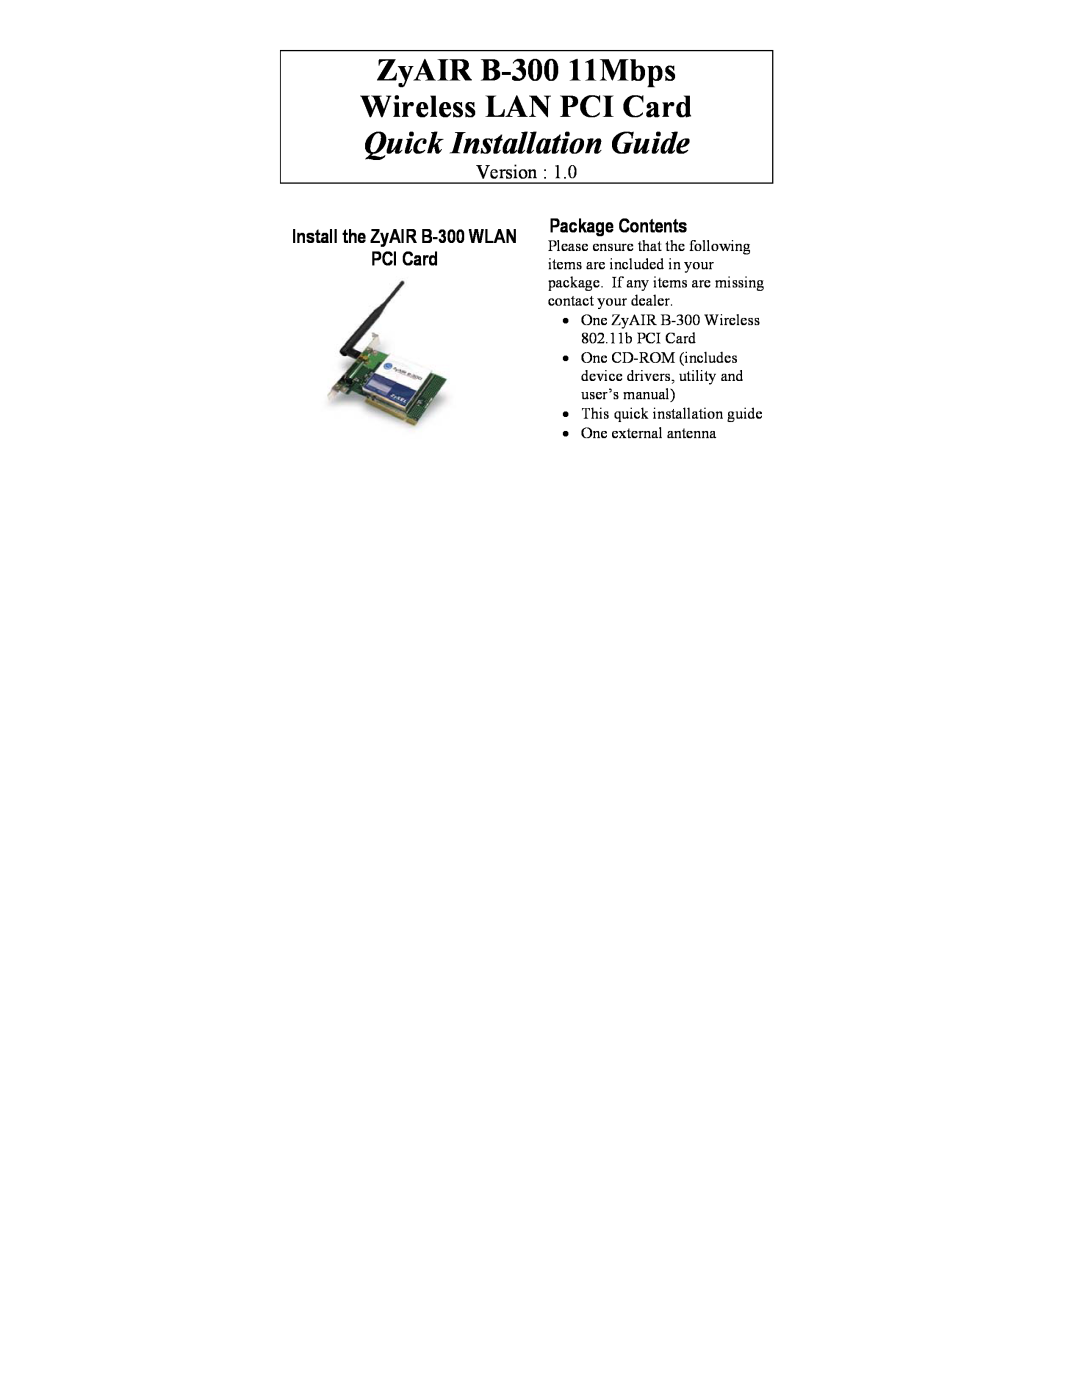 ZyXEL Communications user manual Install the ZyAIR B-300 WLAN PCI Card, Package Contents, Version 